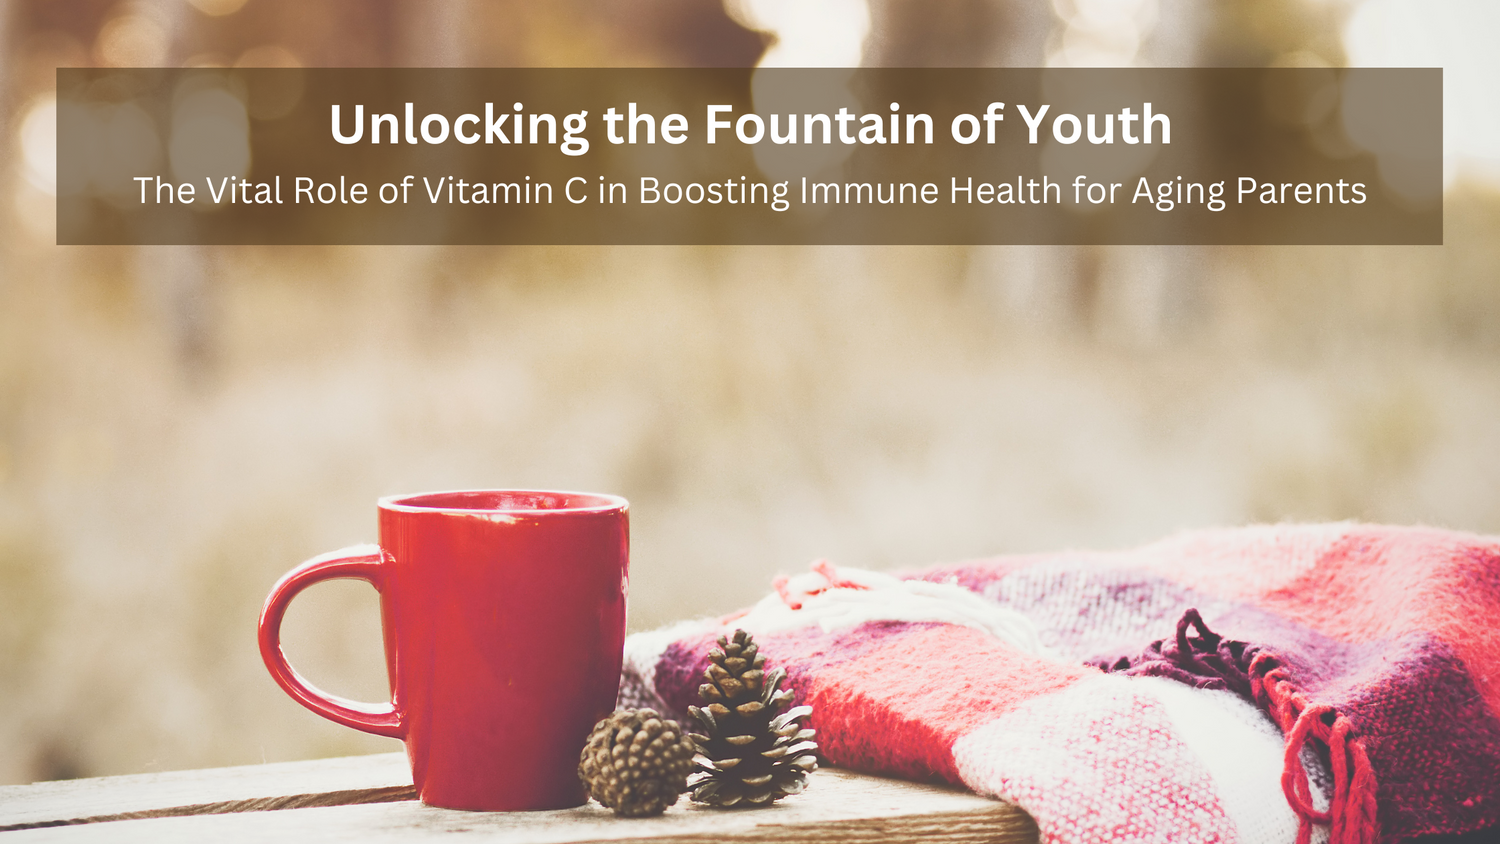 Unlocking the Fountain of Youth: The Vital Role of Vitamin C in Boosting Immune Health for Aging Parents